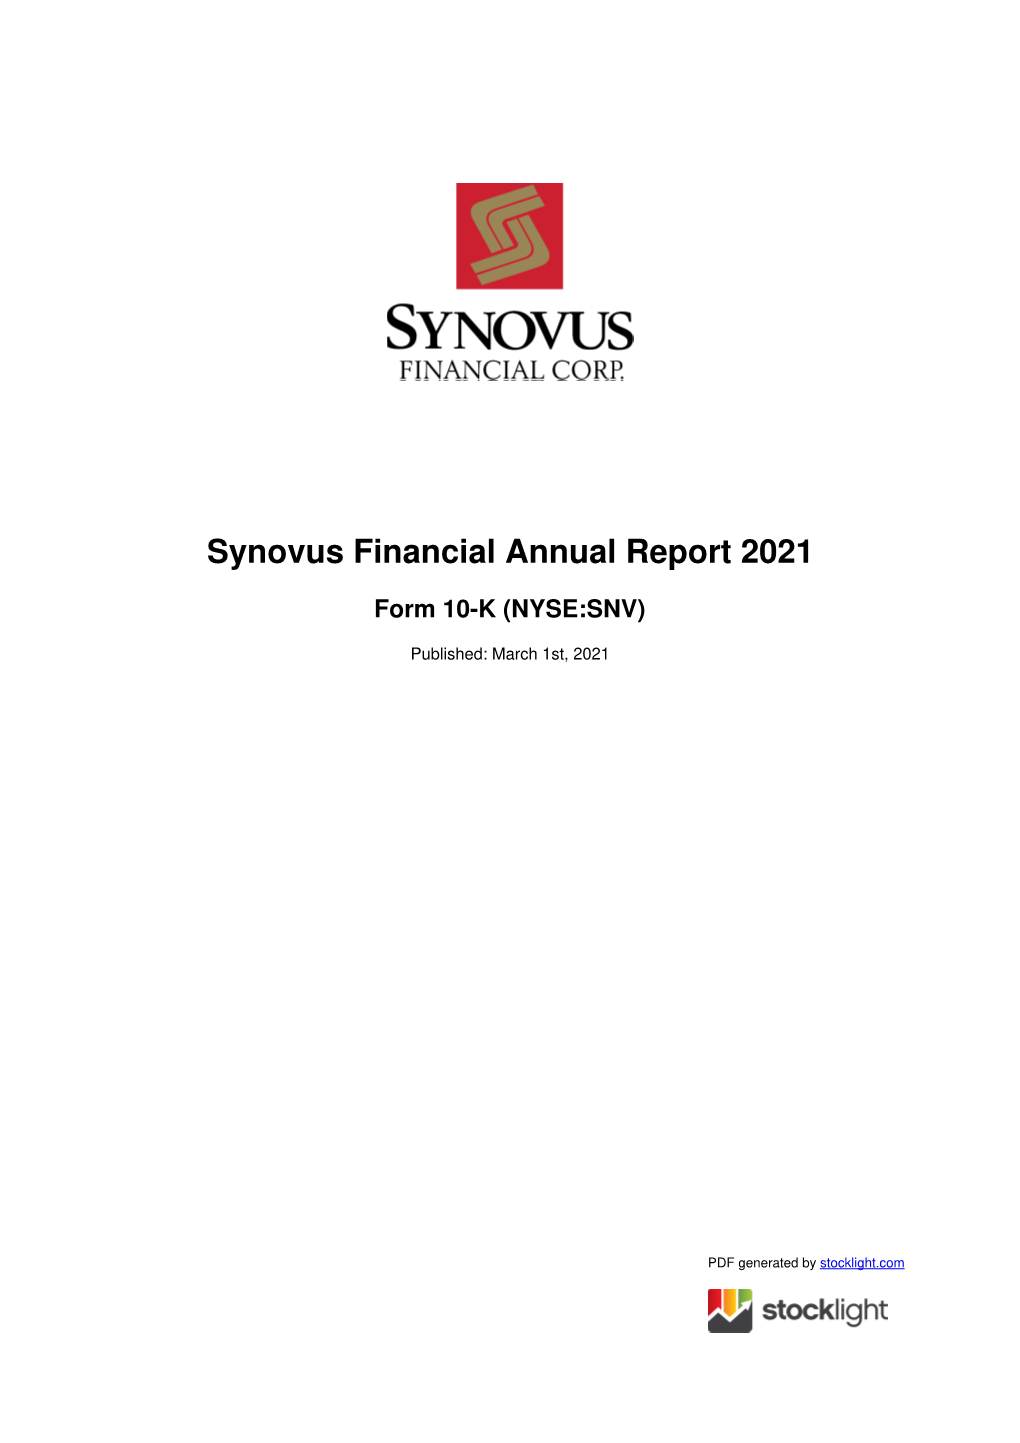 Synovus Financial Annual Report 2021